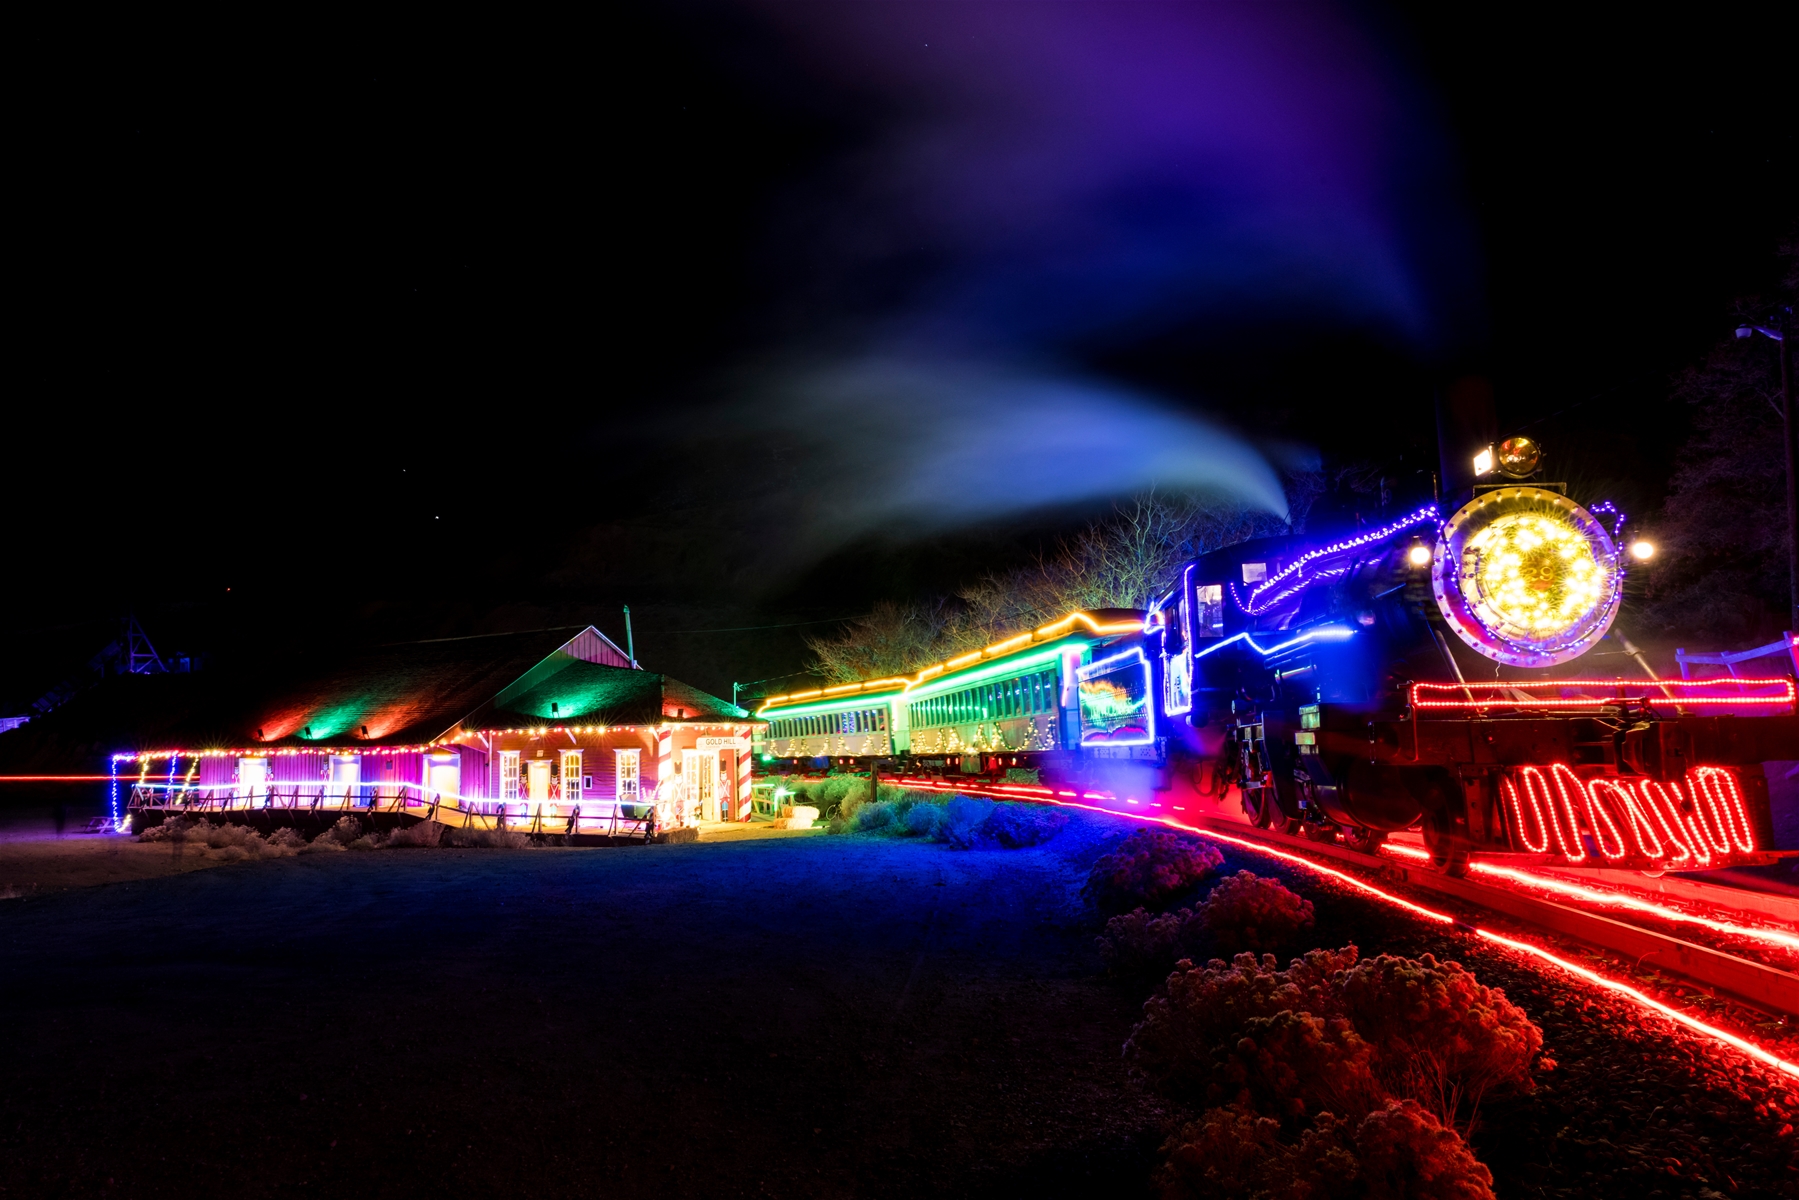 Holiday Steam Engine Covered In Lights On A Neon Train Track In The Dark